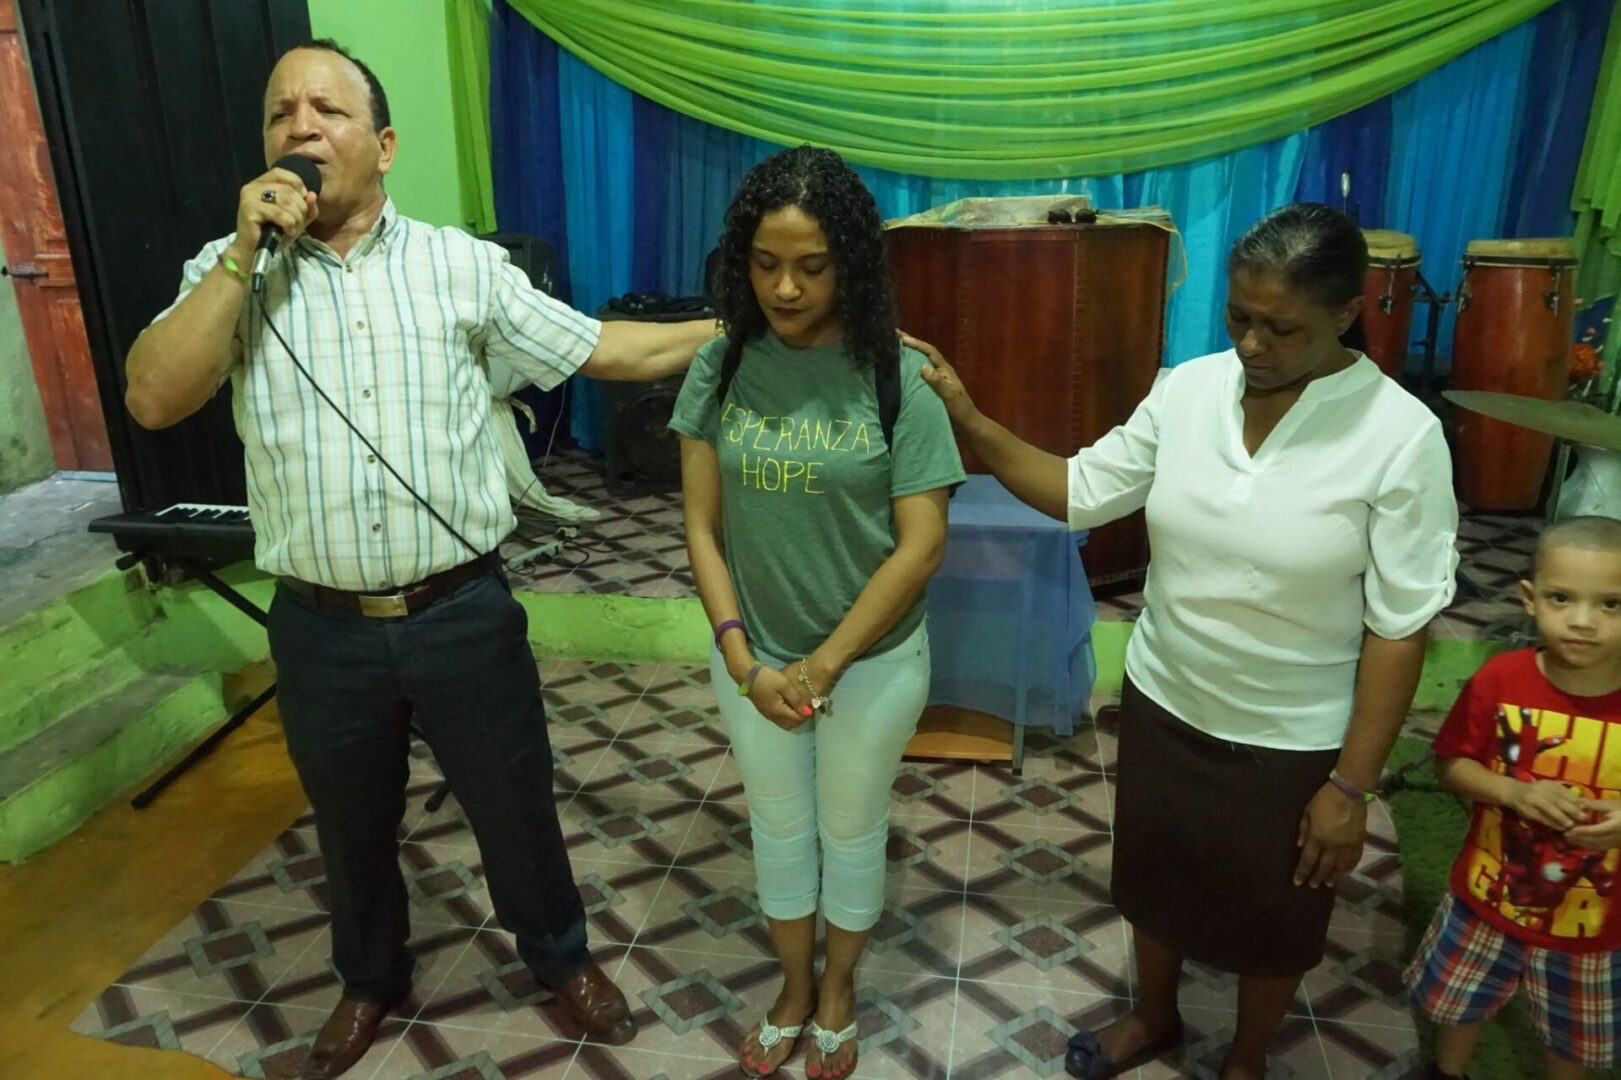 A man speaking into a mic and two women with their eyes closed